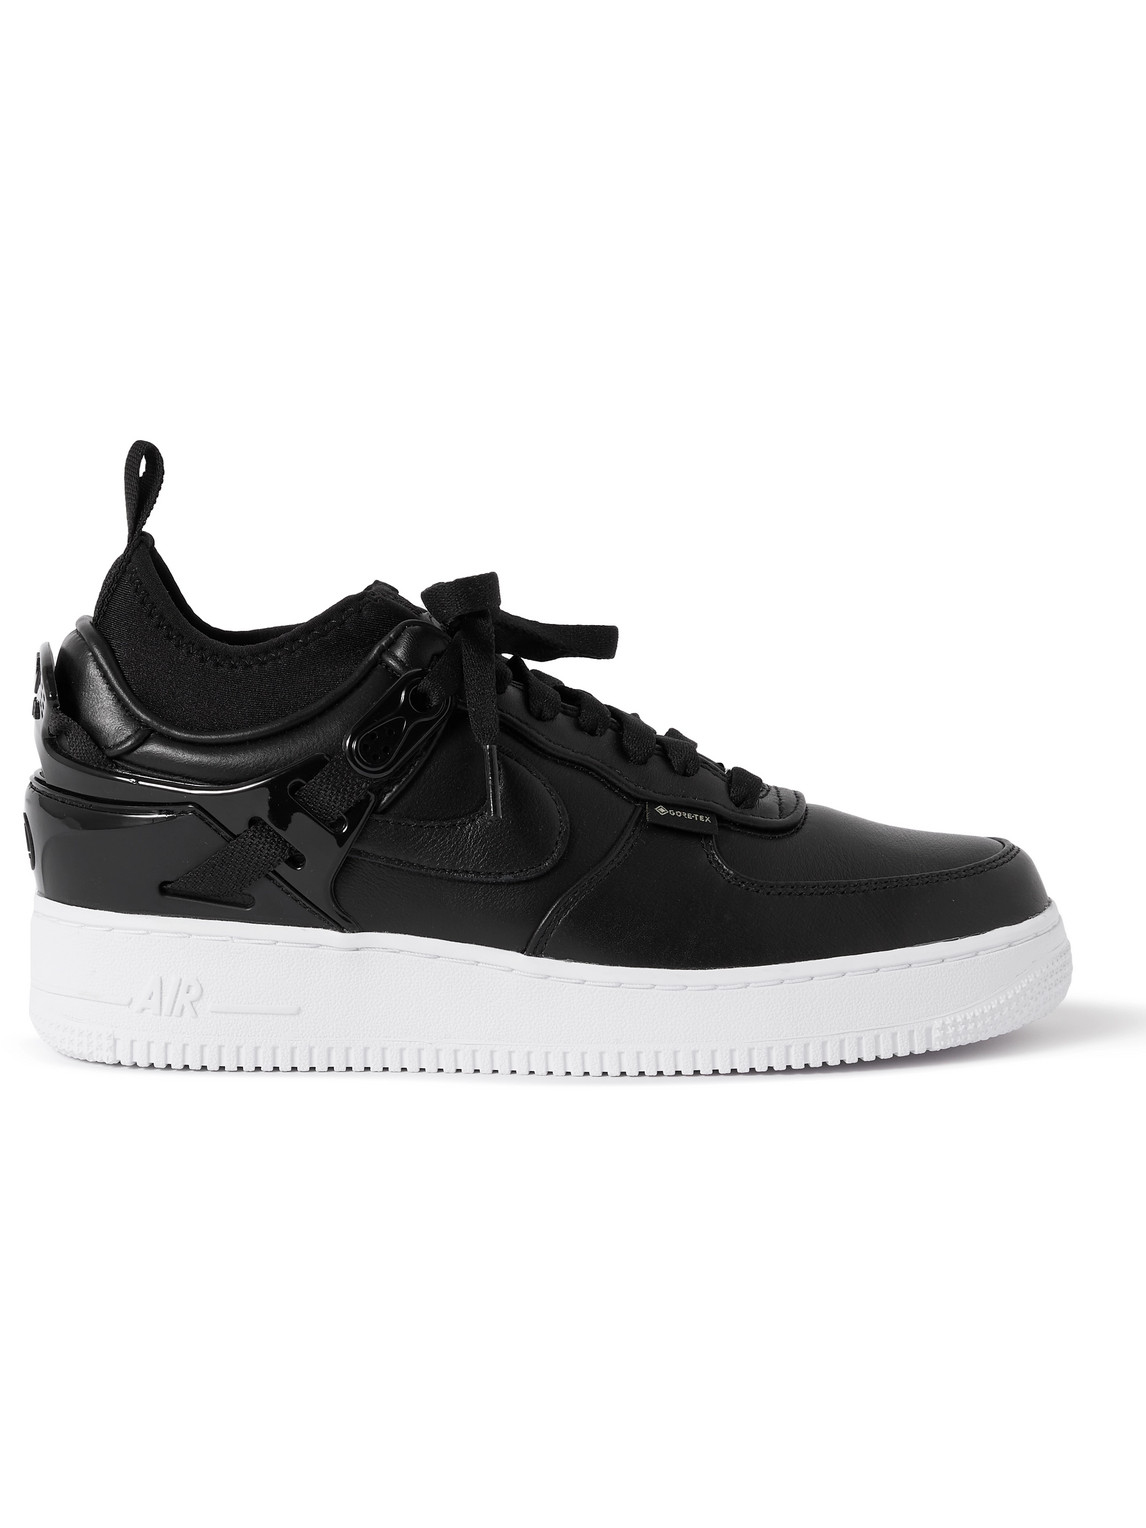 NIKE UNDERCOVER AIR FORCE 1 RUBBER-TRIMMED LEATHER SNEAKERS